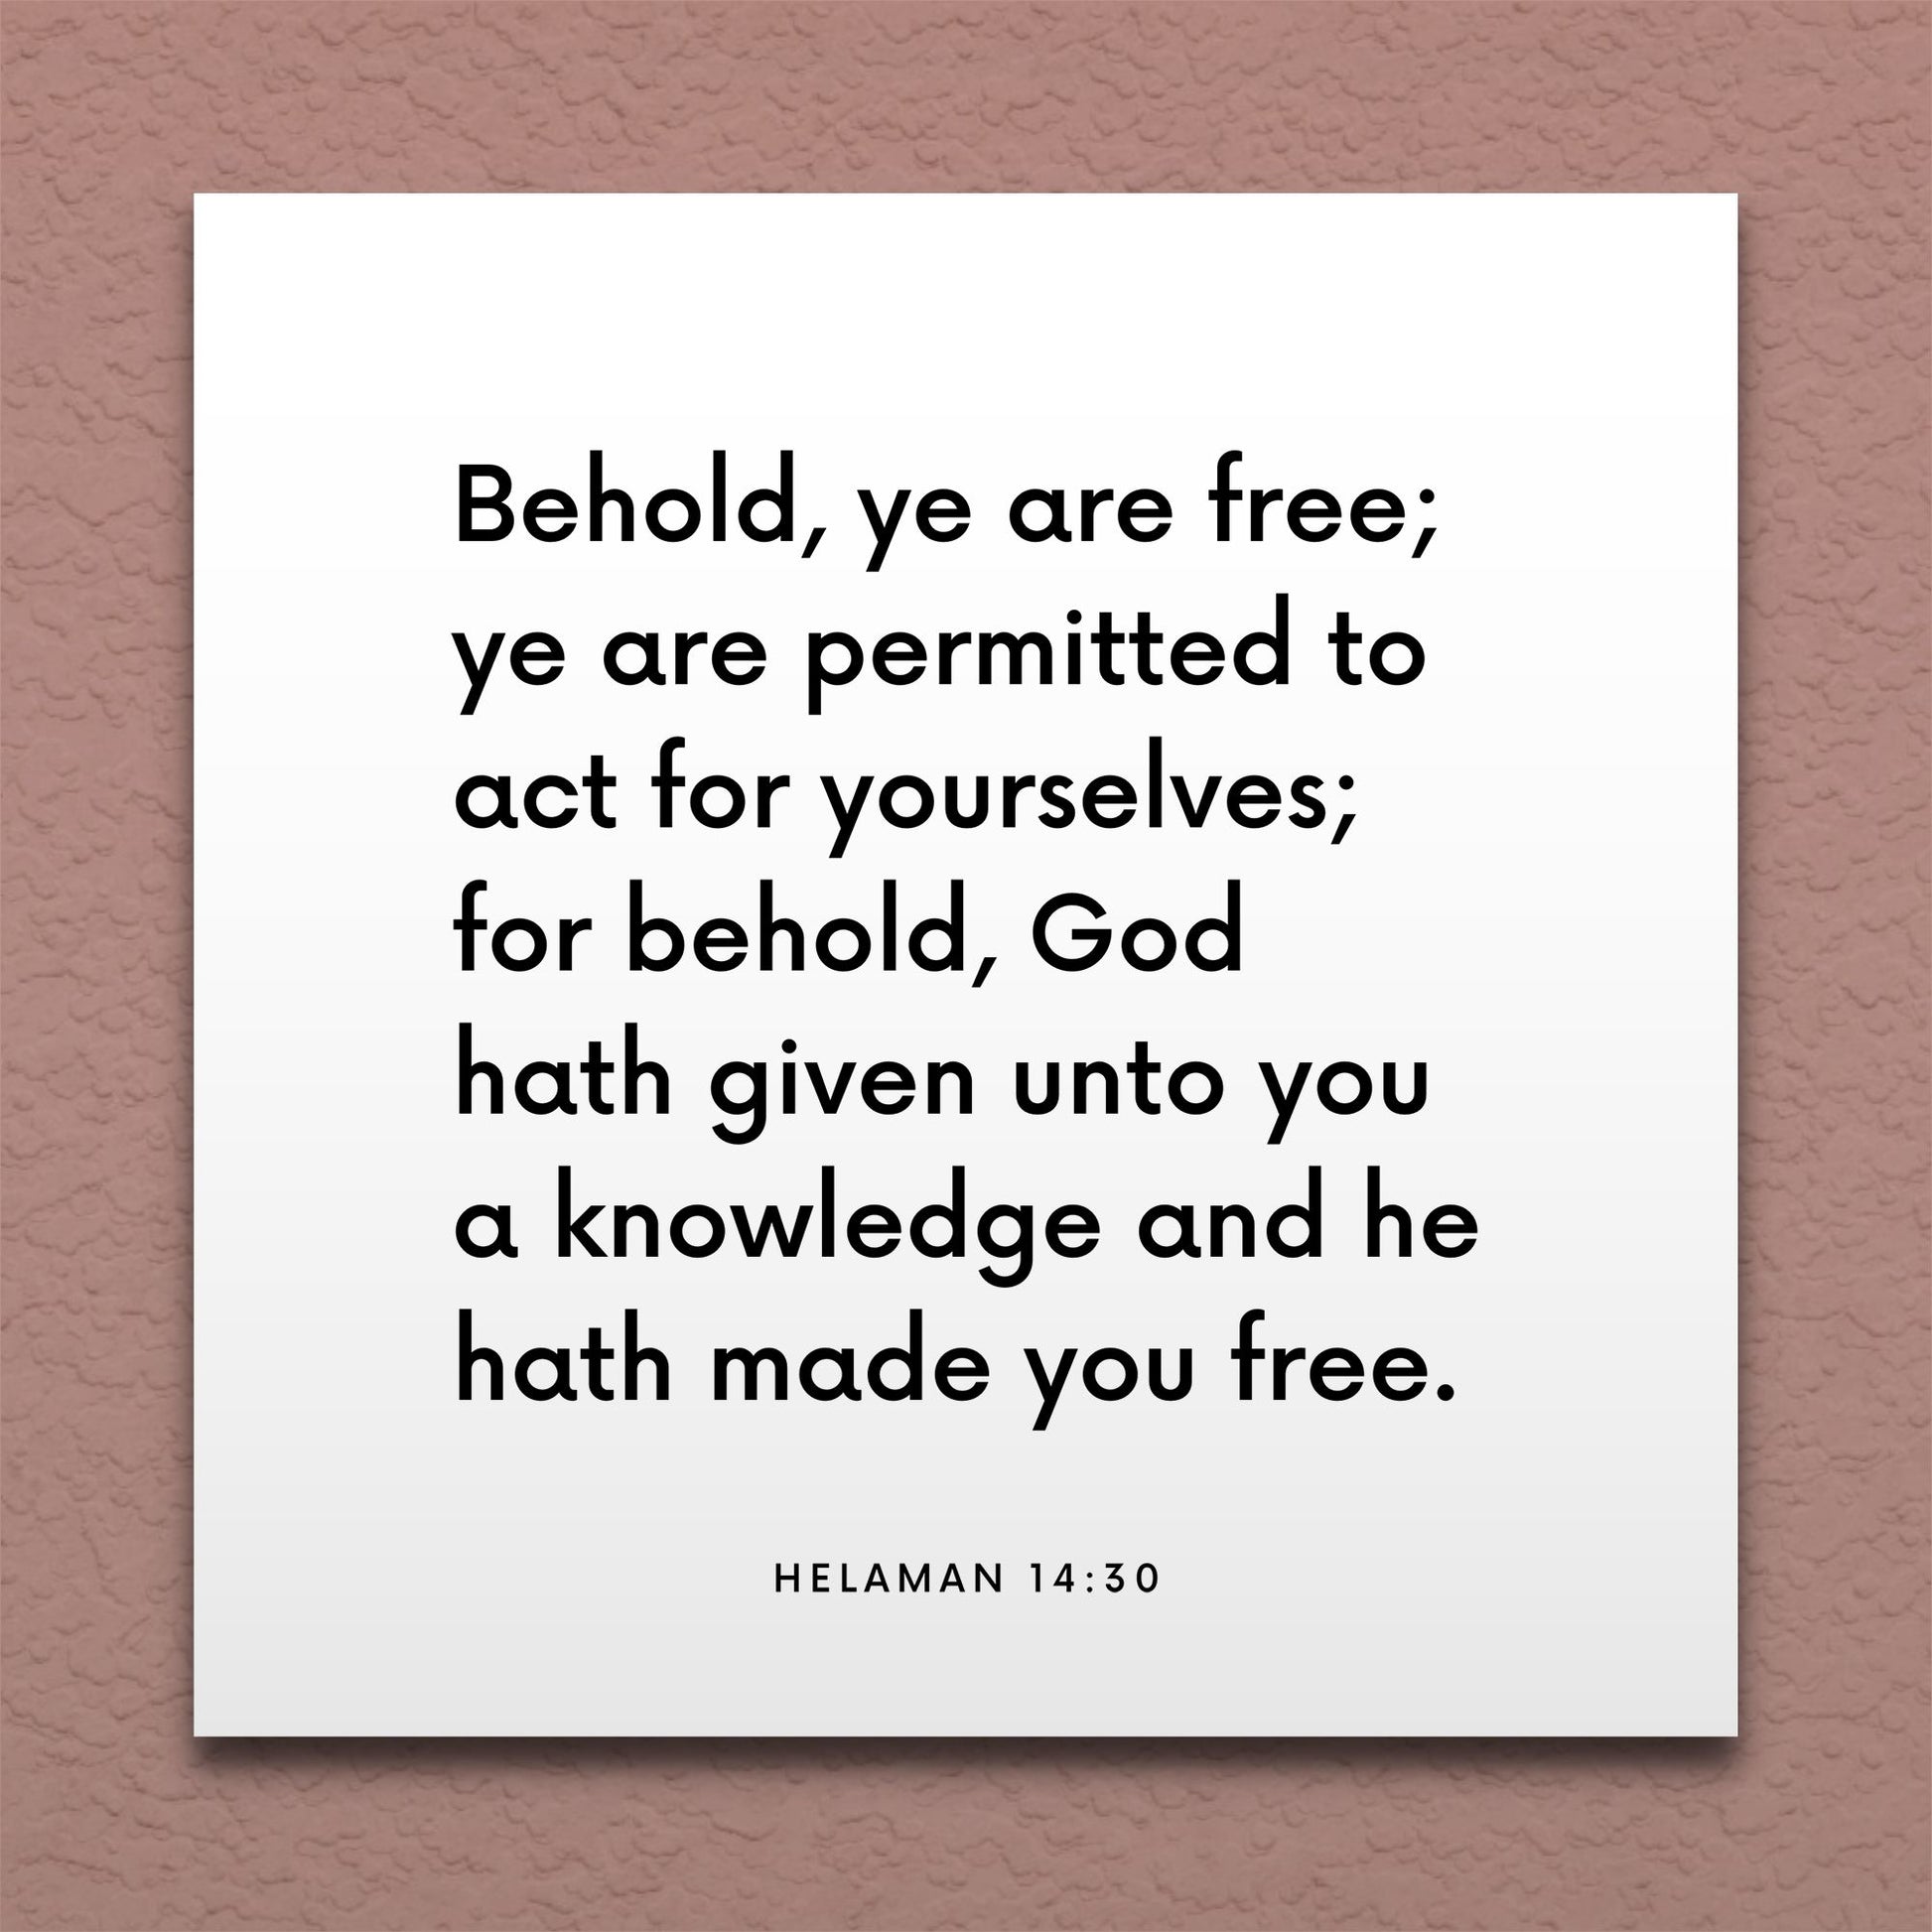 Wall-mounted scripture tile for Helaman 14:30 - "Behold, ye are free; ye are permitted to act for yourselves"